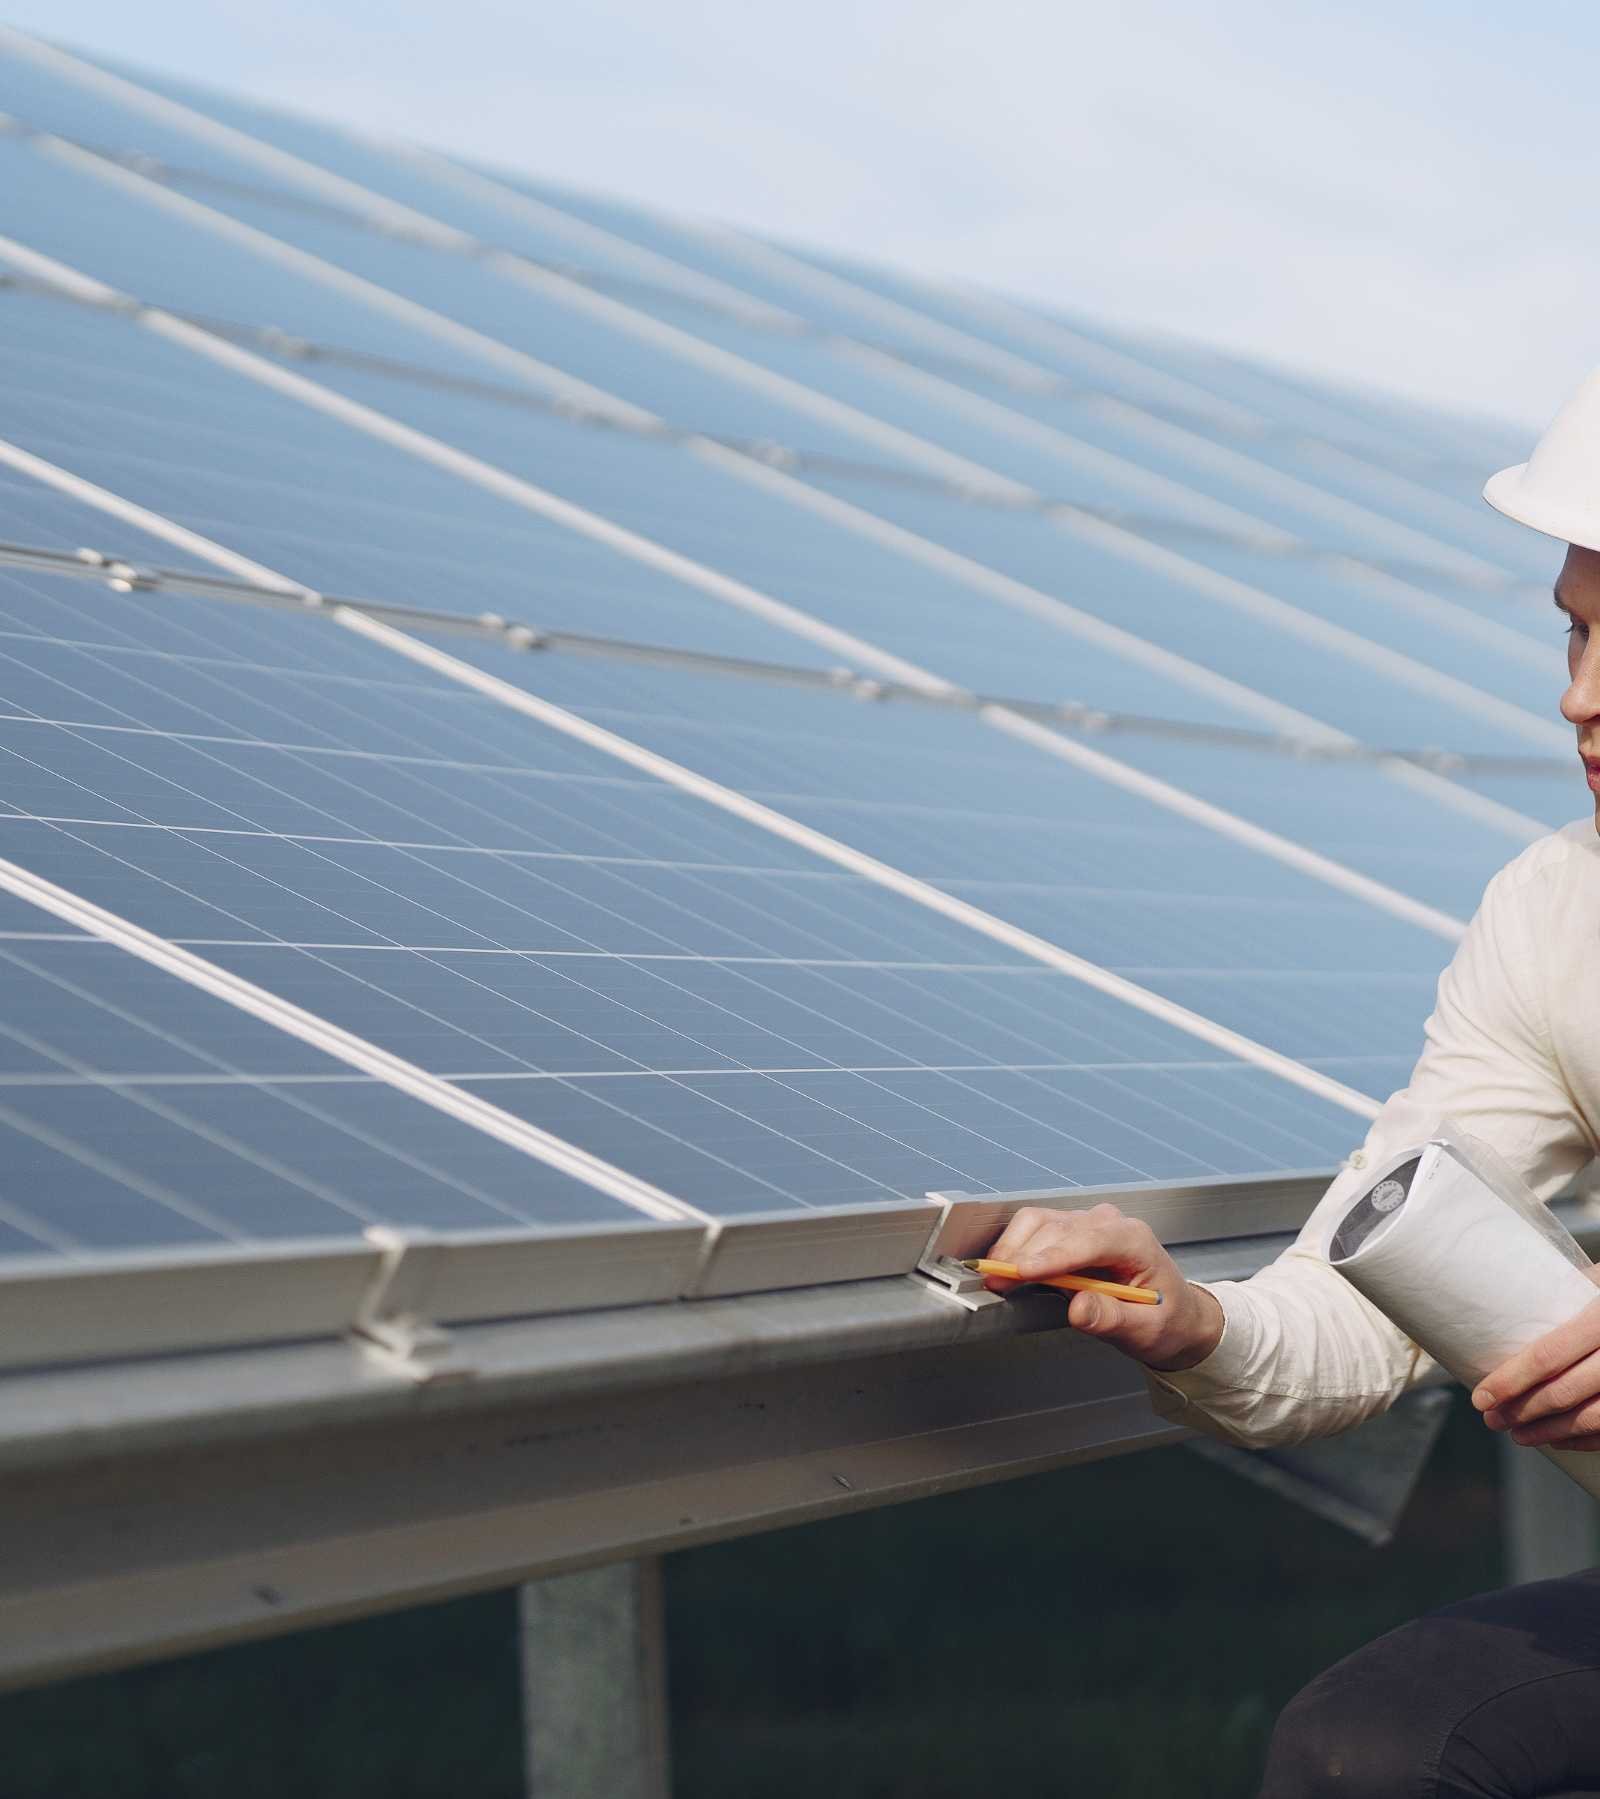 Gremet Solar: Empowering Sustainable Energy Solutions through an Innovative Website